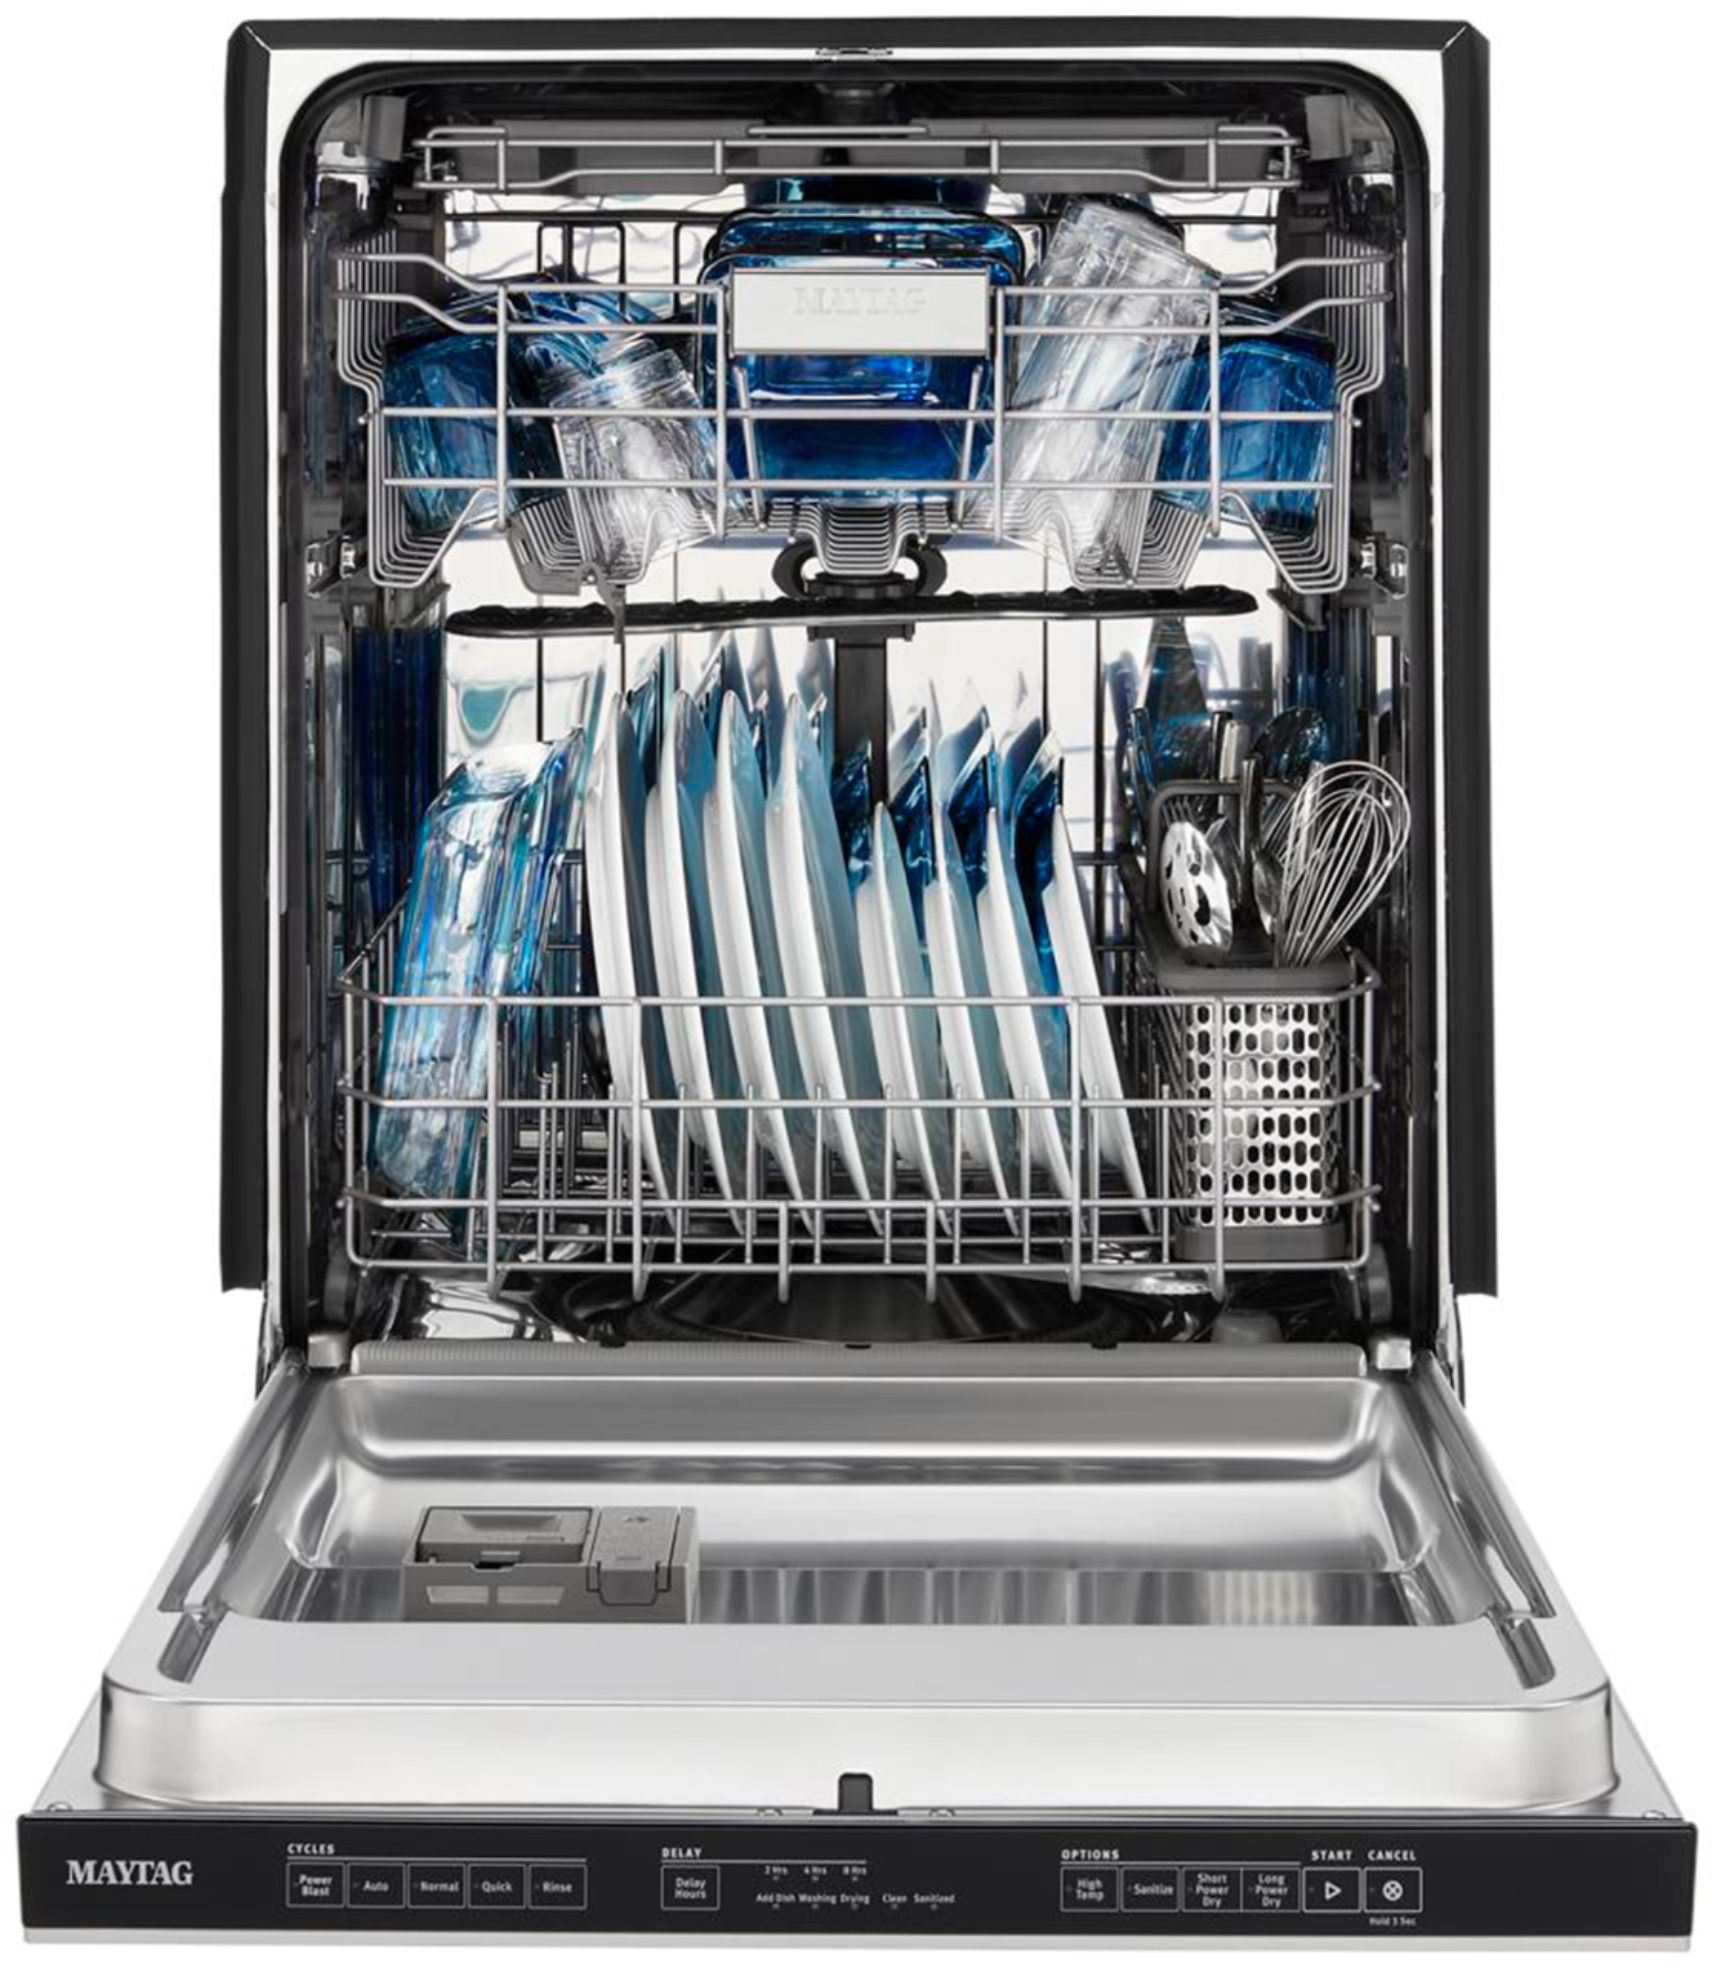 maytag stainless steel dishwasher with fingerprint resistant